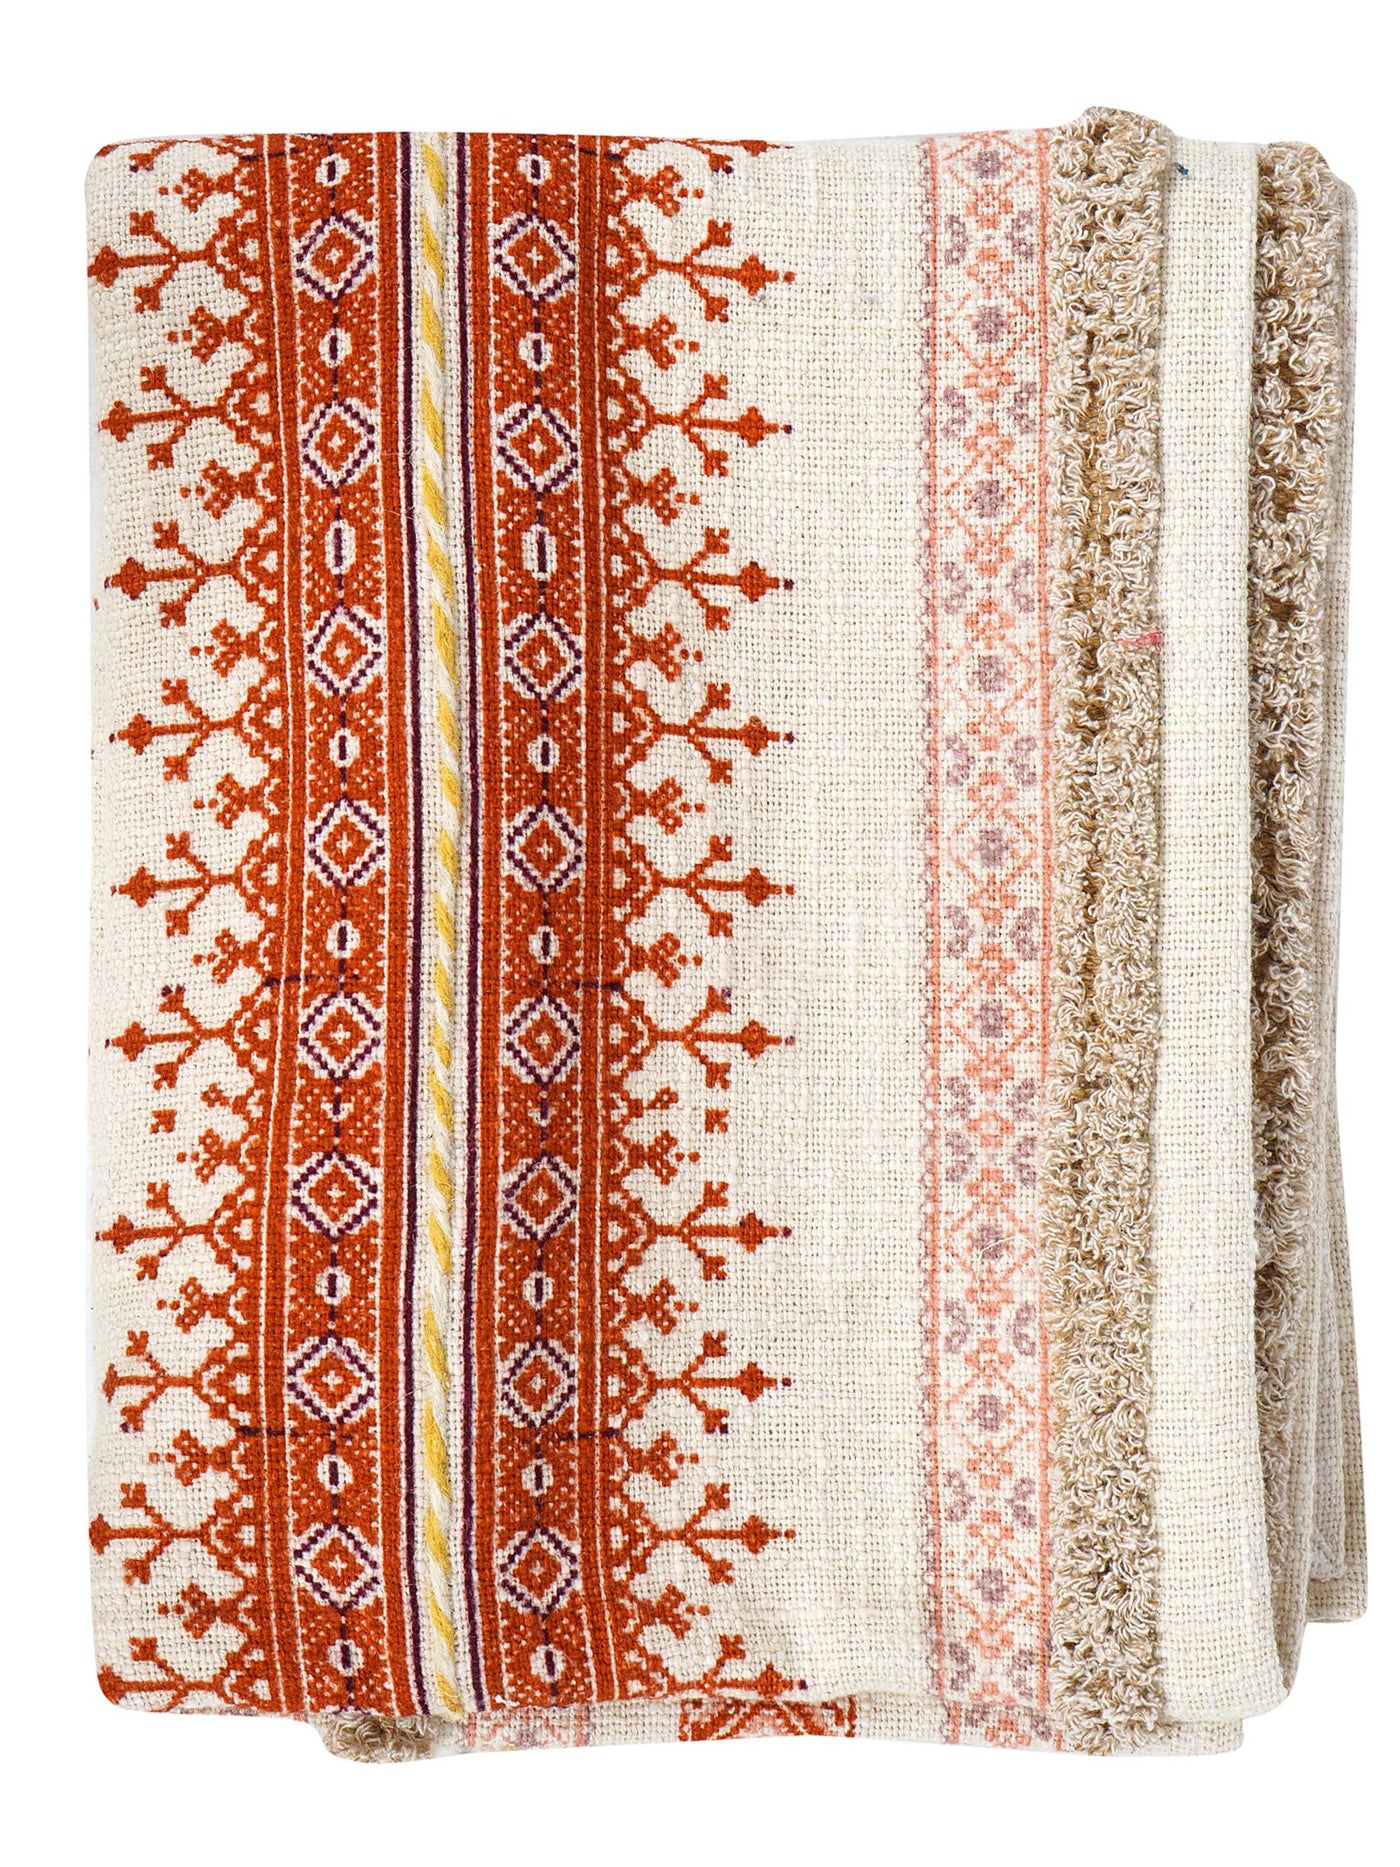 Mihrab Embroidered Throw